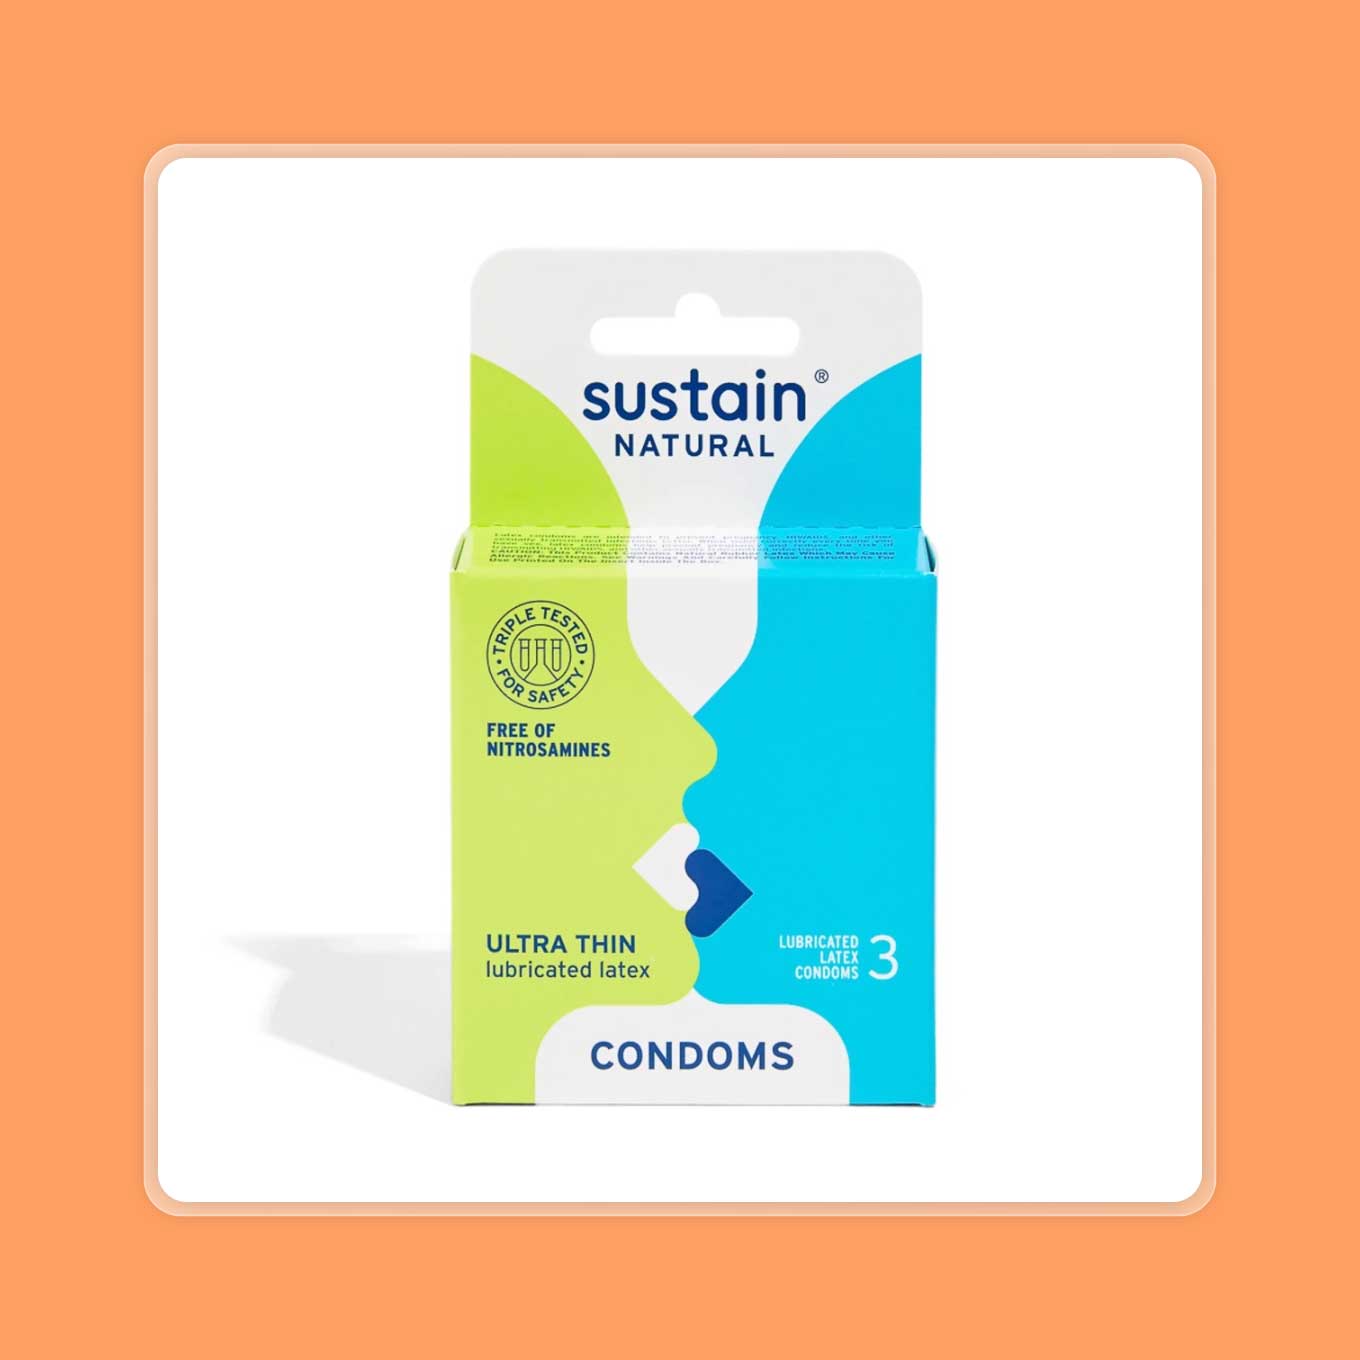 A box of Sustain Natural condoms